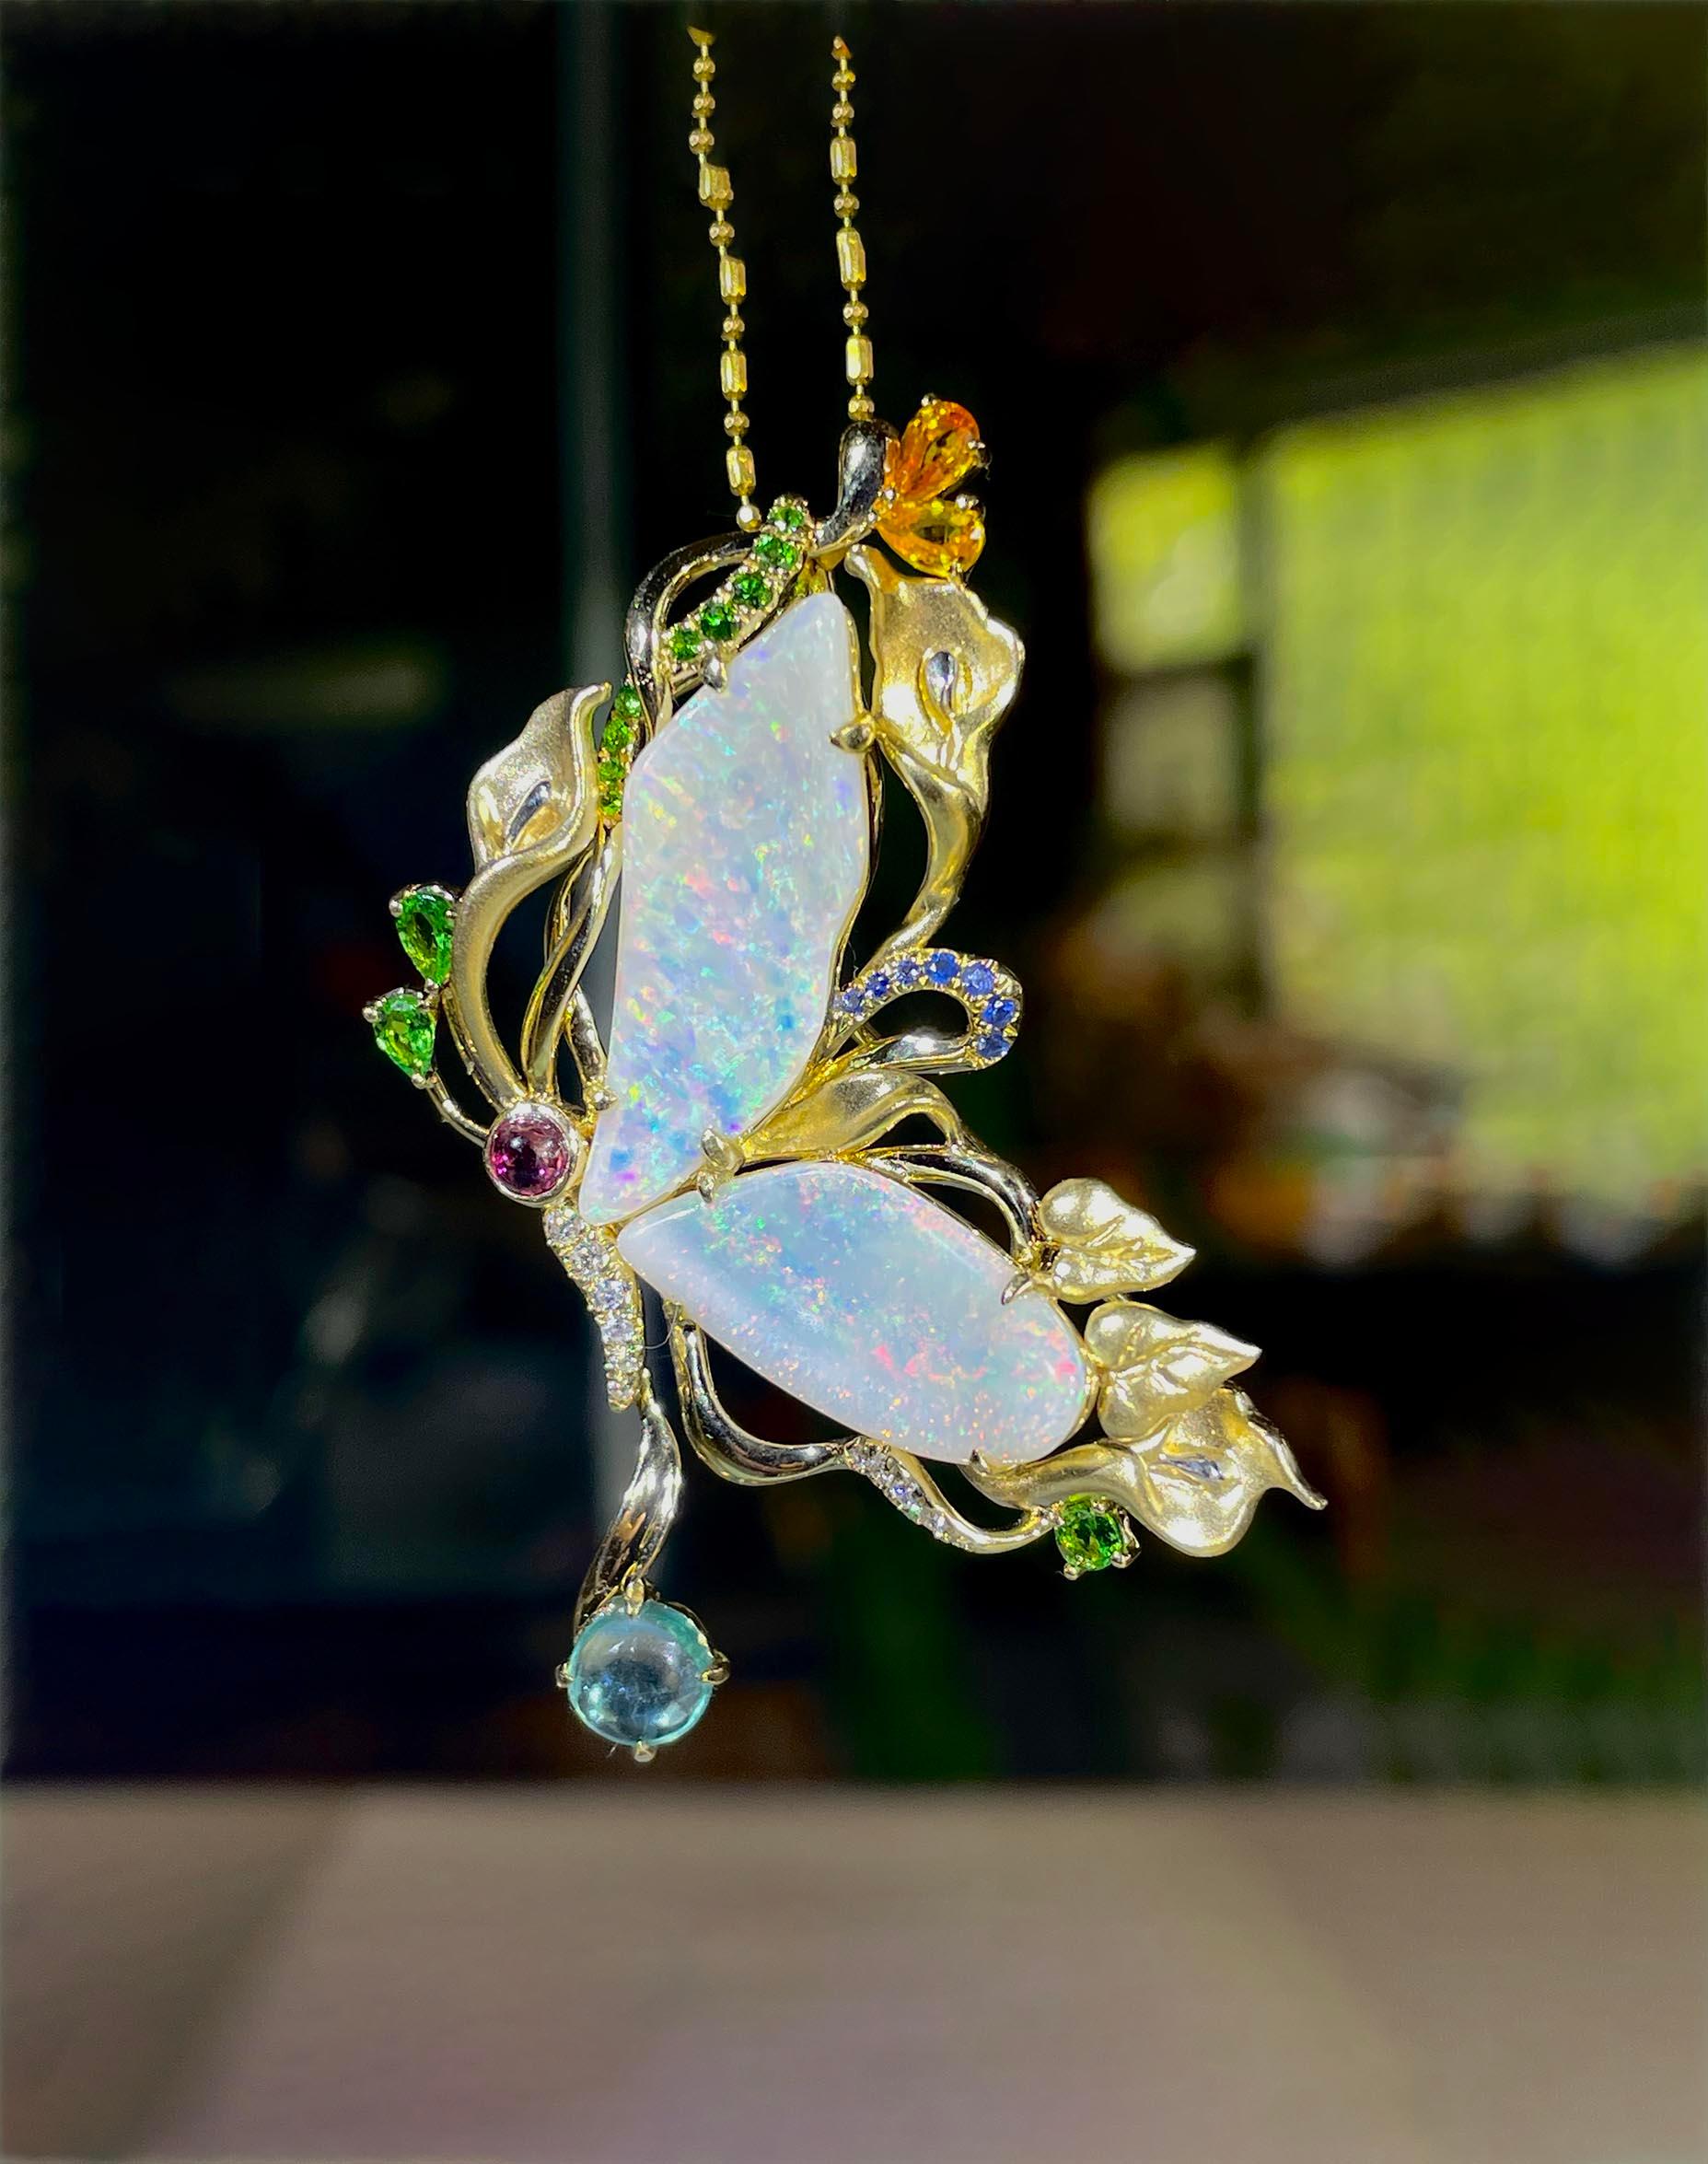   Adorn yourself with this exquisite one-of-a-kind Solid Australian Opal Butterfly Pendant / Brooch crafted in 14K Gold. The intricate design and exquisite craftsmanship create a unique and artistic interpretation of a butterfly in flight leveraging